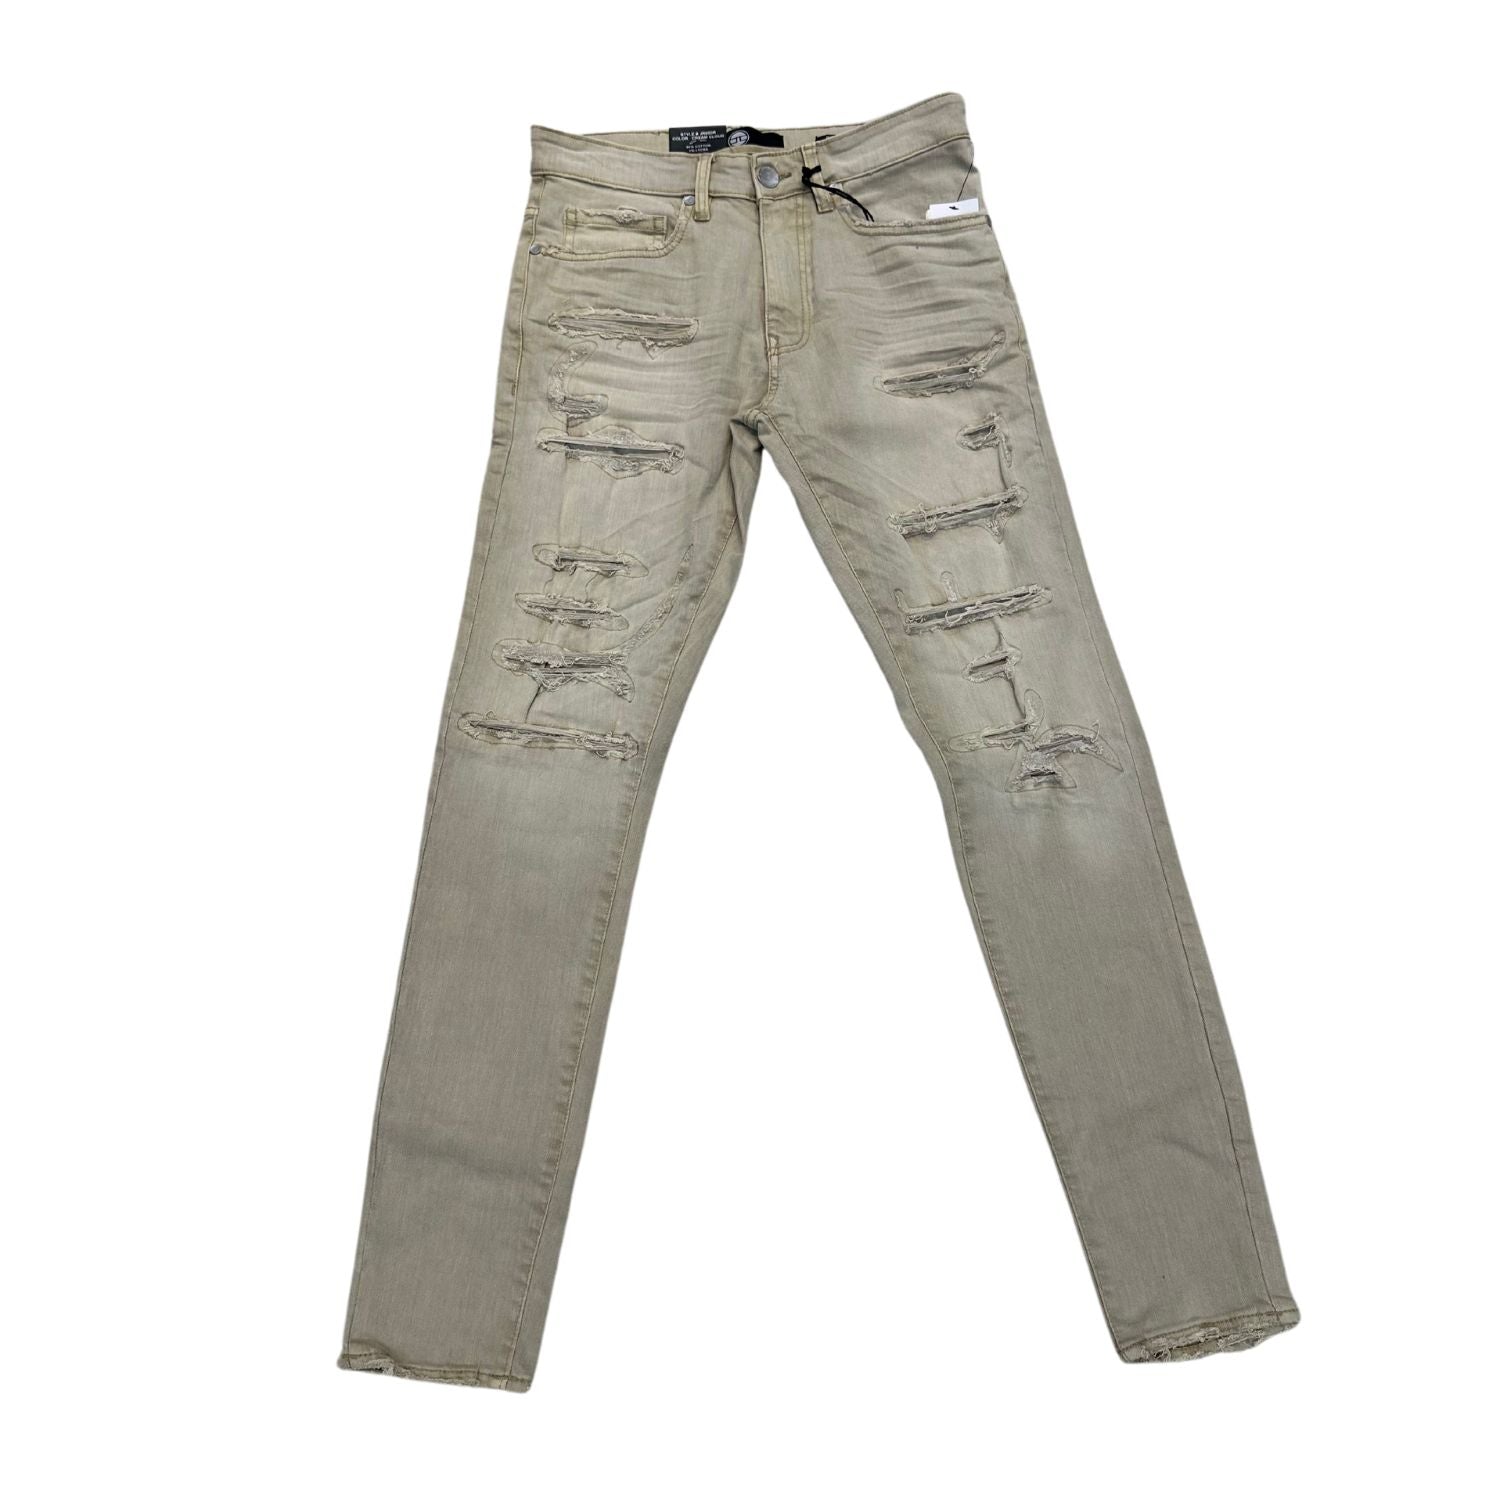 Jordan Craig Ross Fit With Shreds Jeans Mens Style : Jr9502r